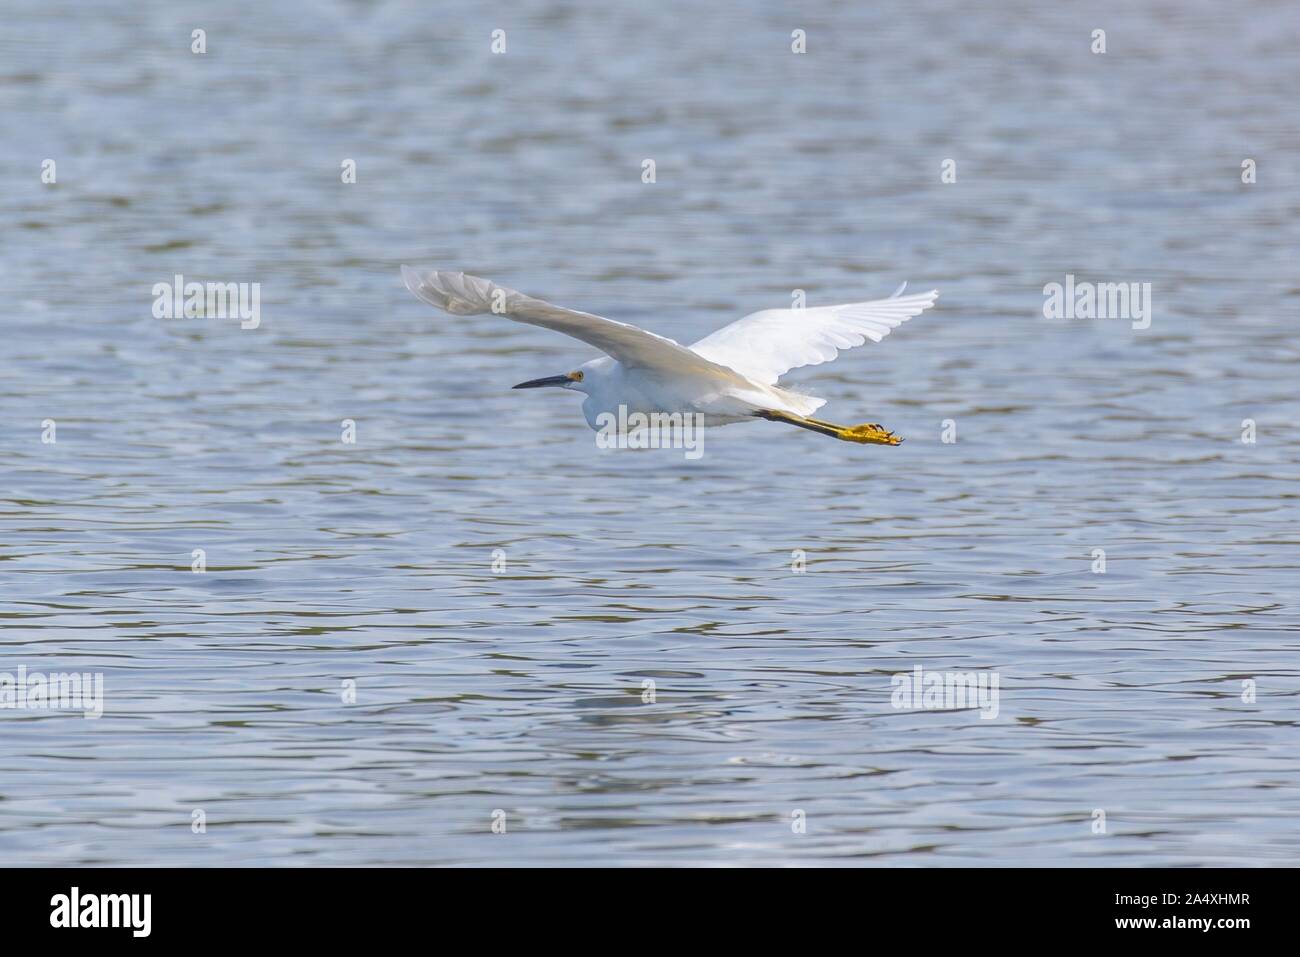 Graceful Snowy White Egret glides across the pond water surface with white wings spread wide. Stock Photo